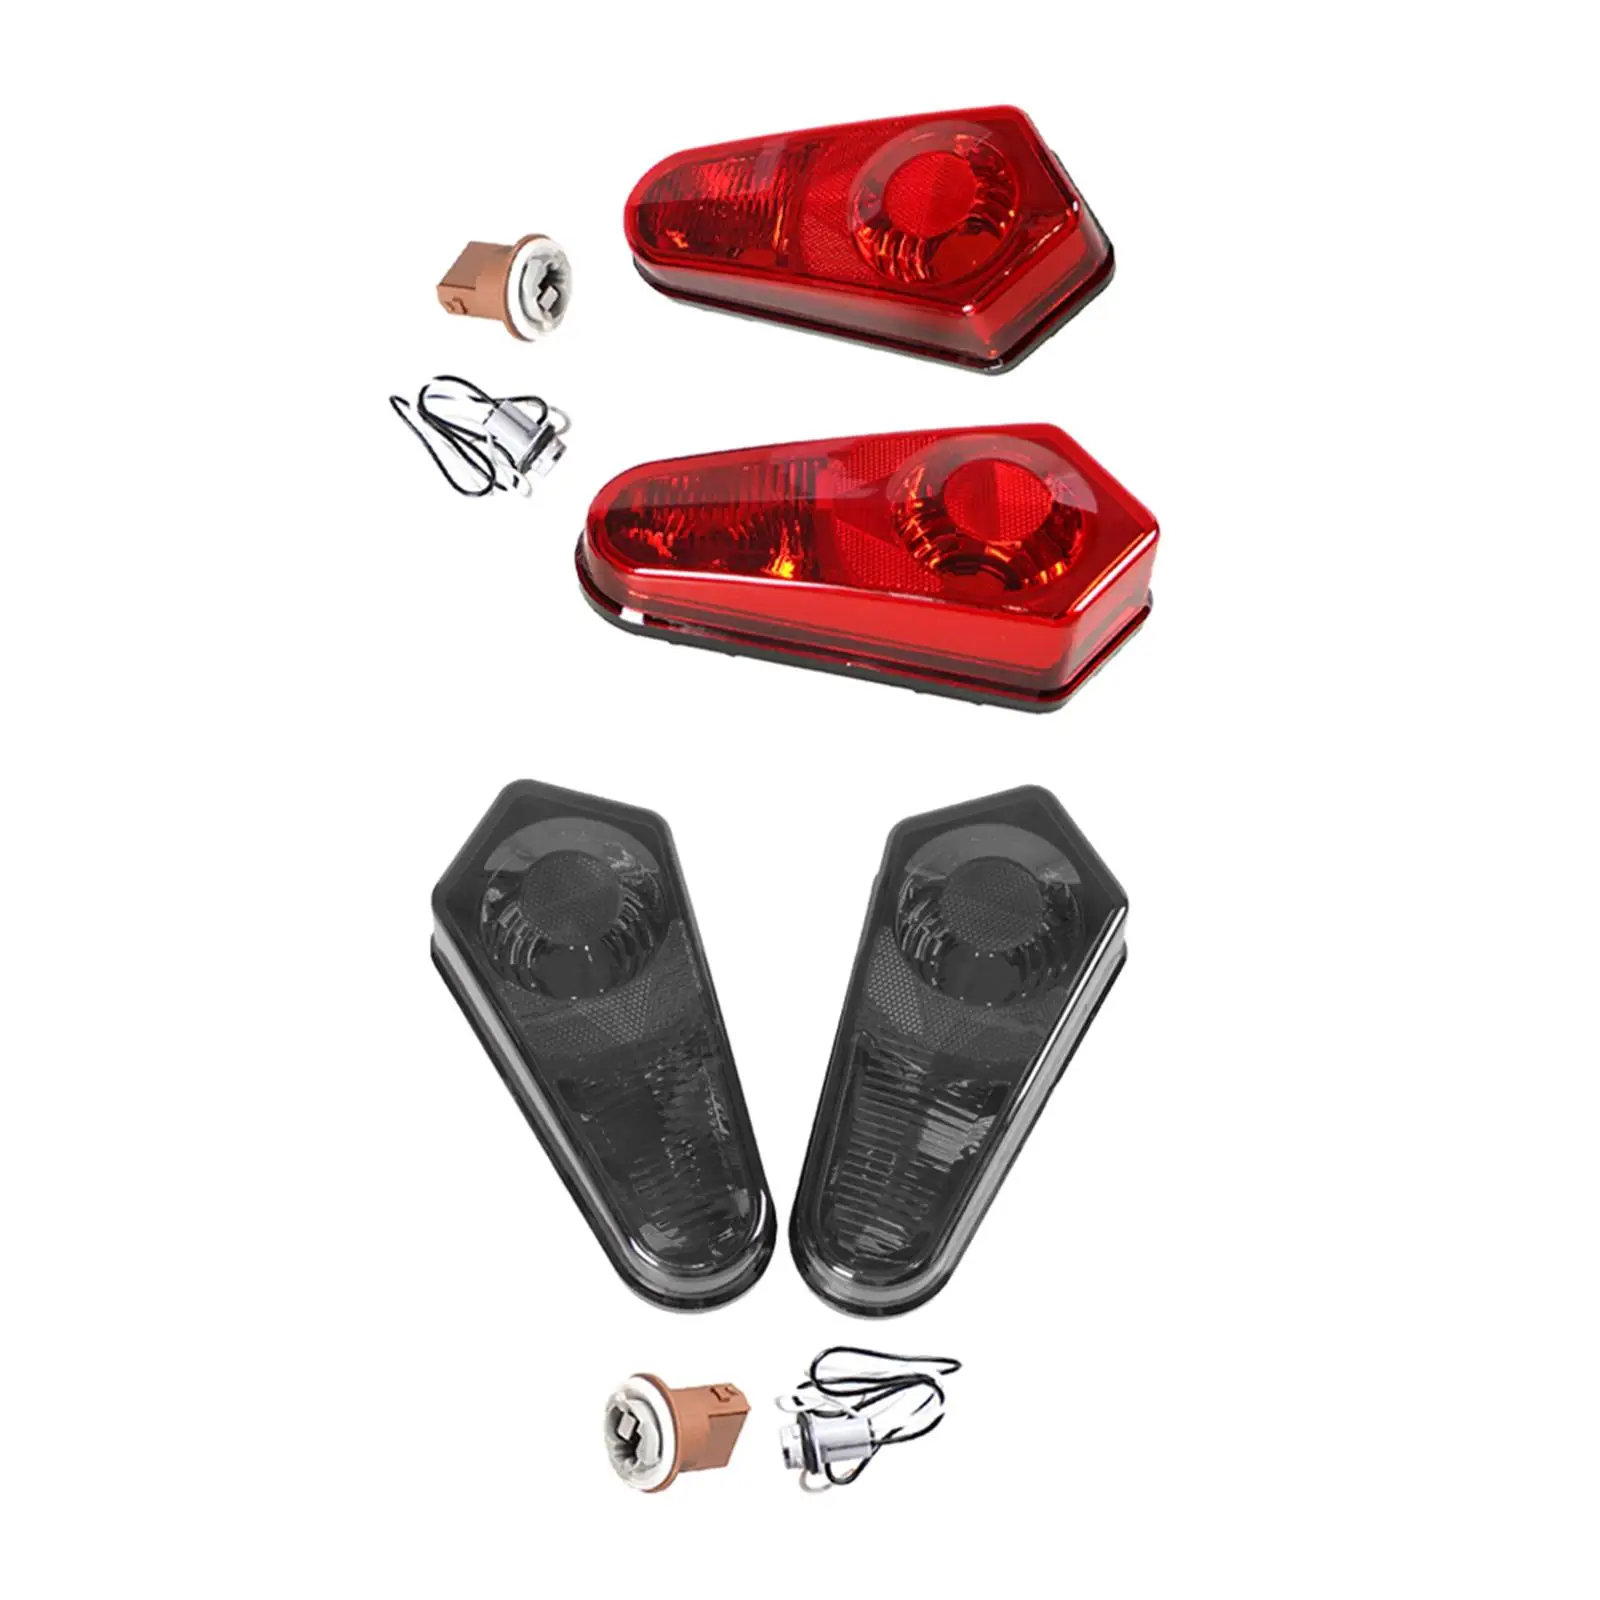 1 Pair LED Tail Light Lamp Fit for Polaris Sportsman 550 09-14 Replacement